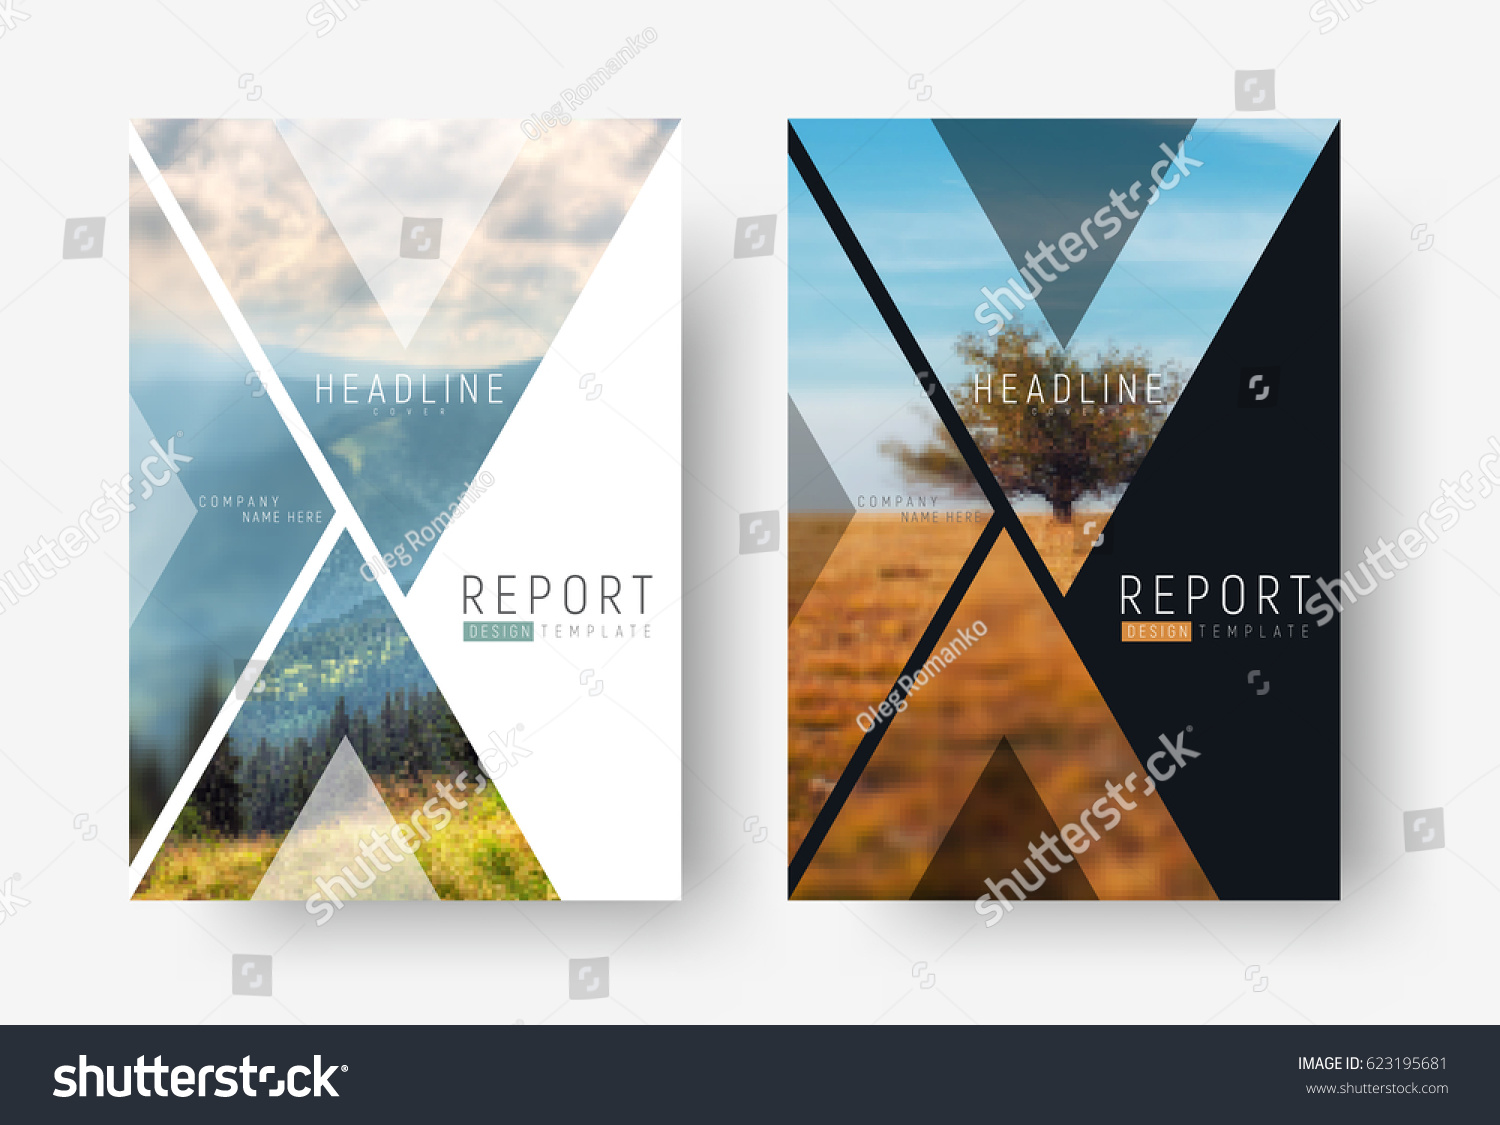 Cover template for a report in a minimalistic style with triangular design elements for a photo. set of modern flyers for business or trips with photos of mountains and landscapes. mosaic for a sample #623195681